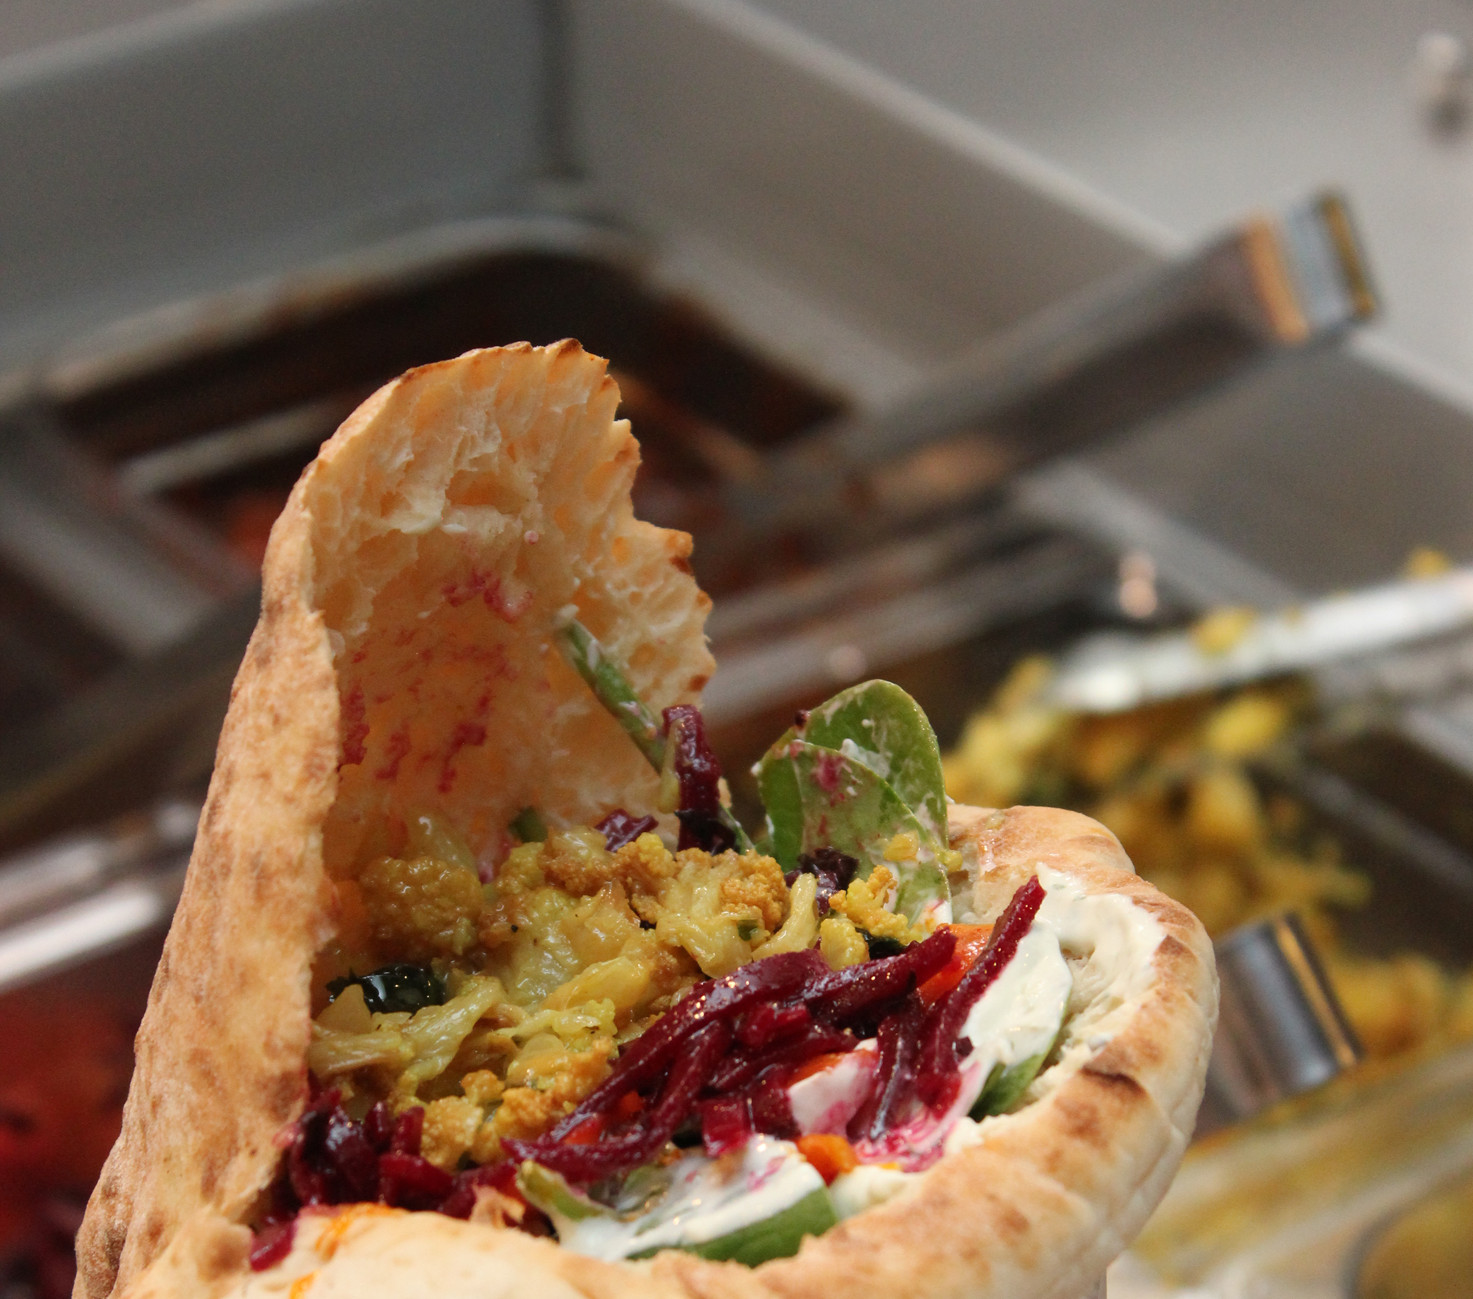 A falafel pita is prepared at Seth Bromberg’s Raving Med in downtown Cleveland’s Playhouse Square district.